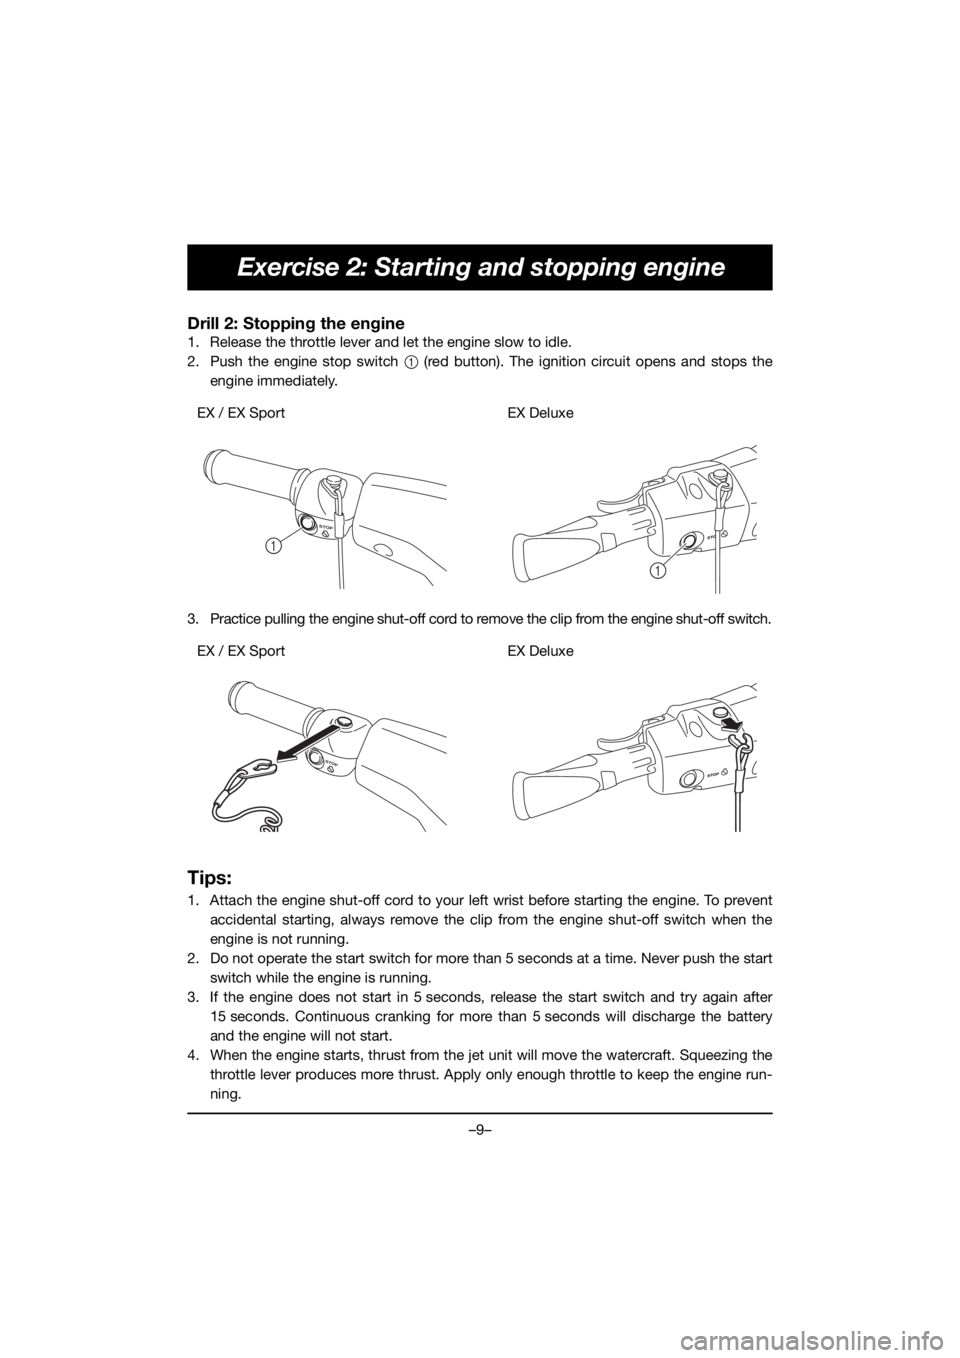 YAMAHA EX DELUXE 2019 User Guide –9–
Exercise 2: Starting and stopping engine
Drill 2: Stopping the engine
1. Release the throttle lever and let the engine slow to idle.
2. Push the engine stop switch 1 (red button). The ignition